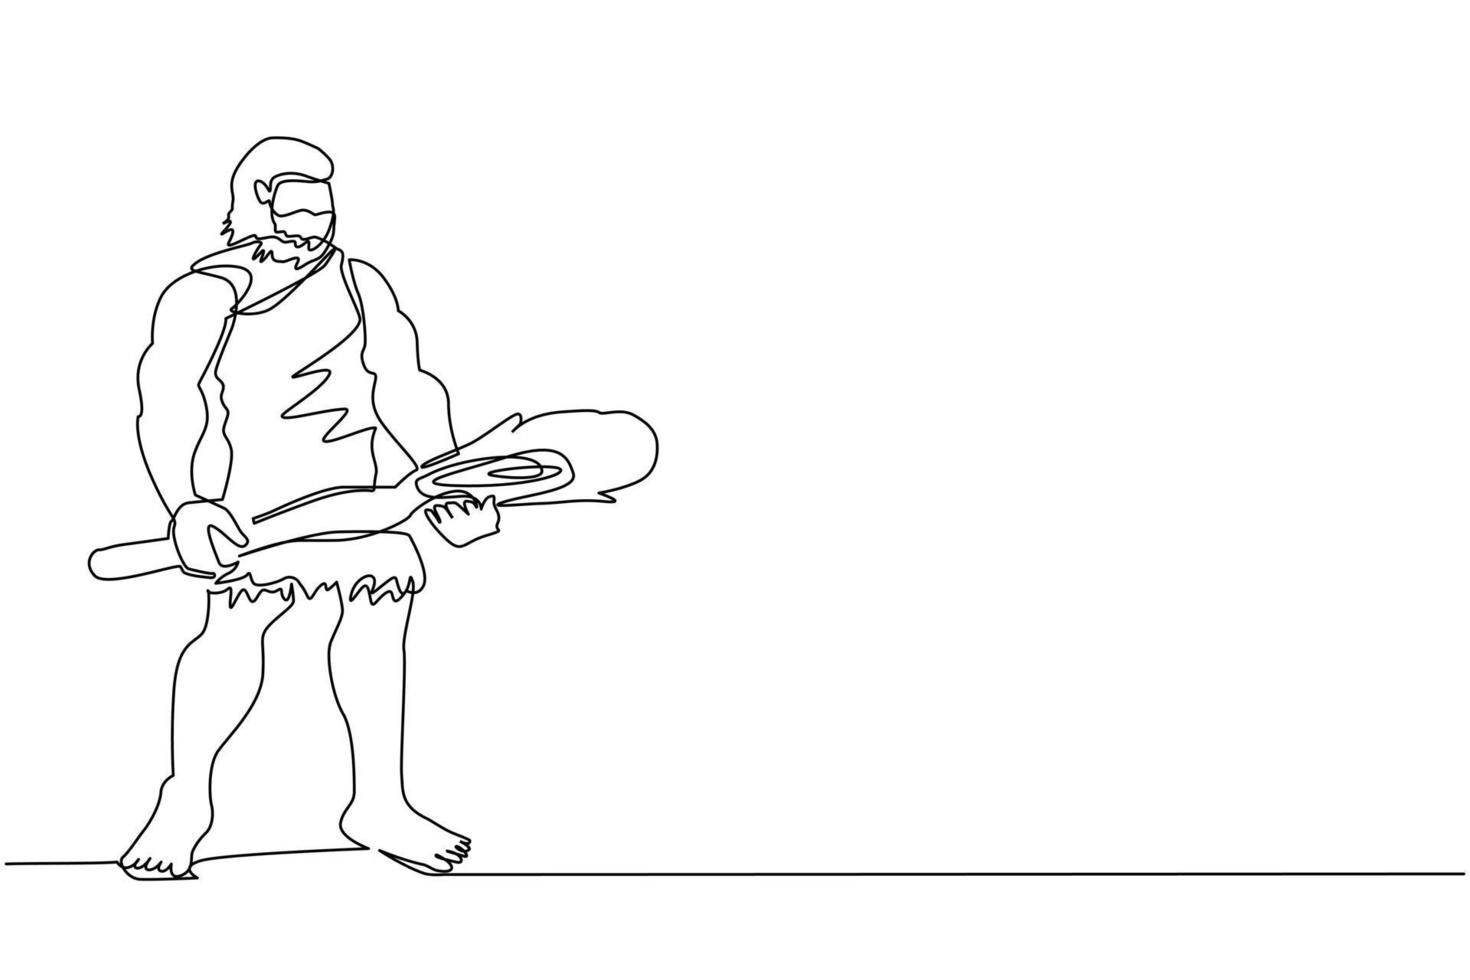 Single one line drawing caveman holding big wooden club or cudgel. Prehistoric bearded man dressed in animal pelt. Neanderthal hunter. Ancient homosapiens. Continuous line draw design graphic vector